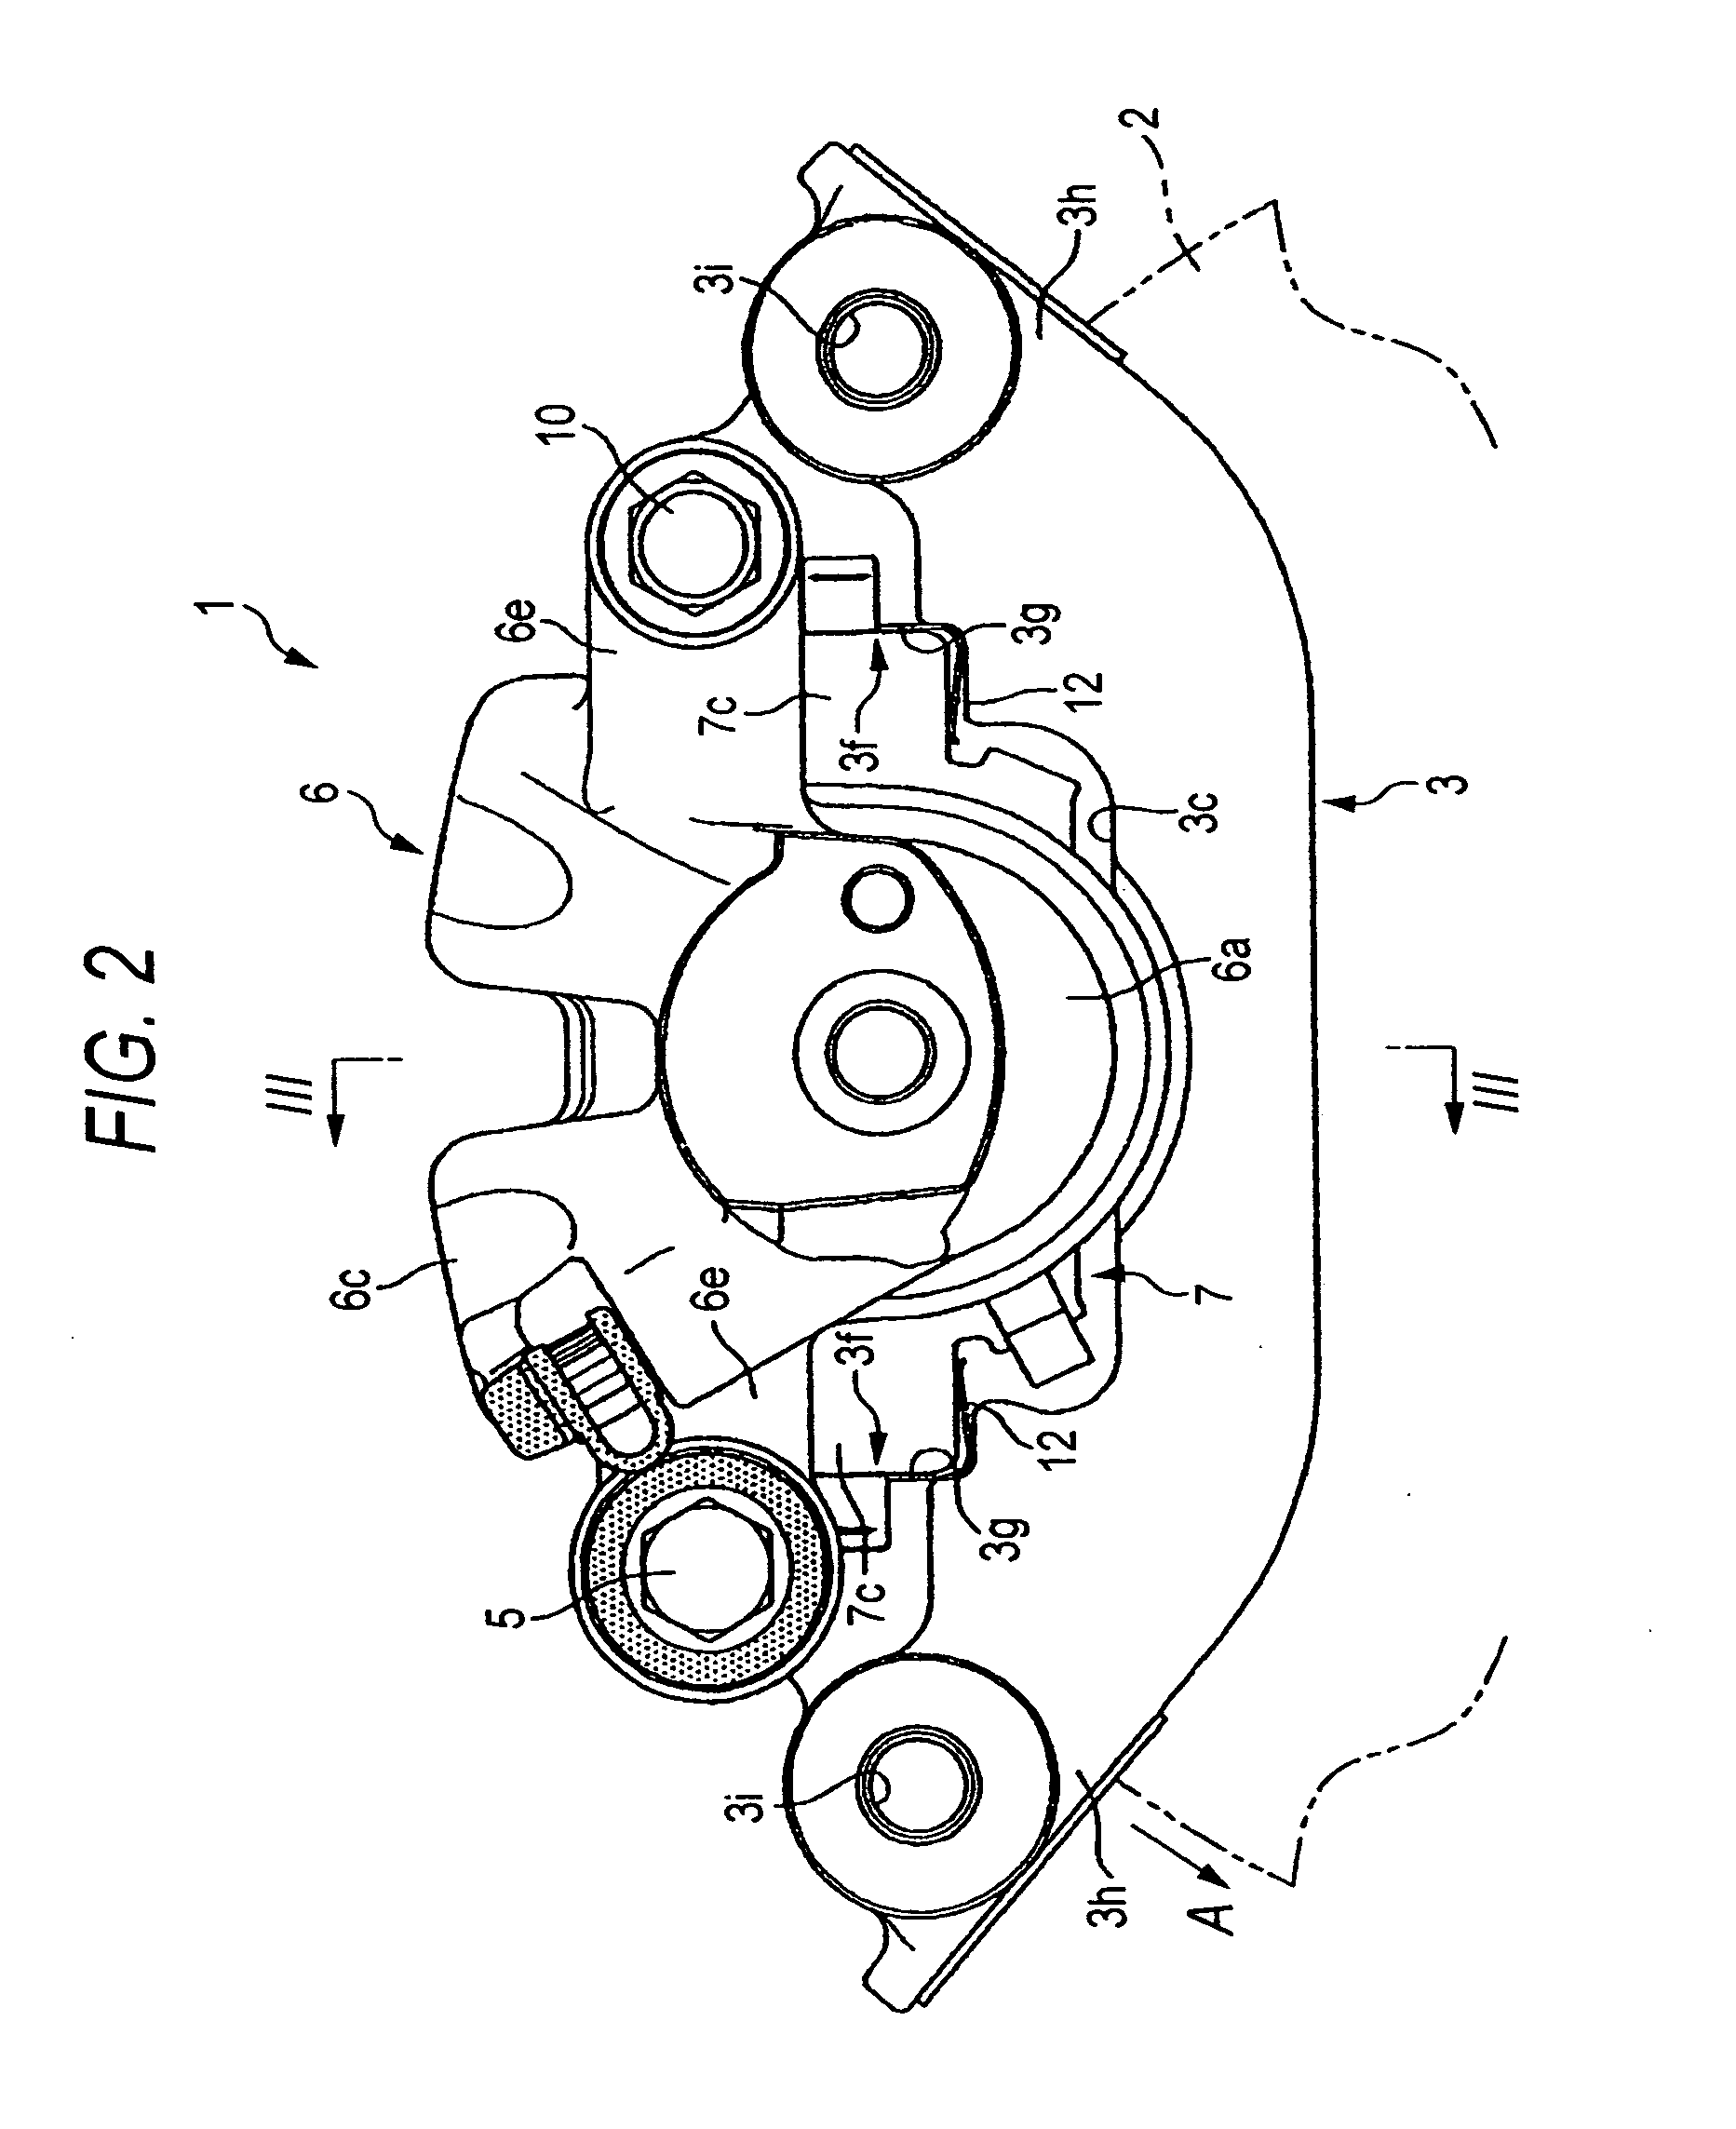 Disc brake for a vehicle